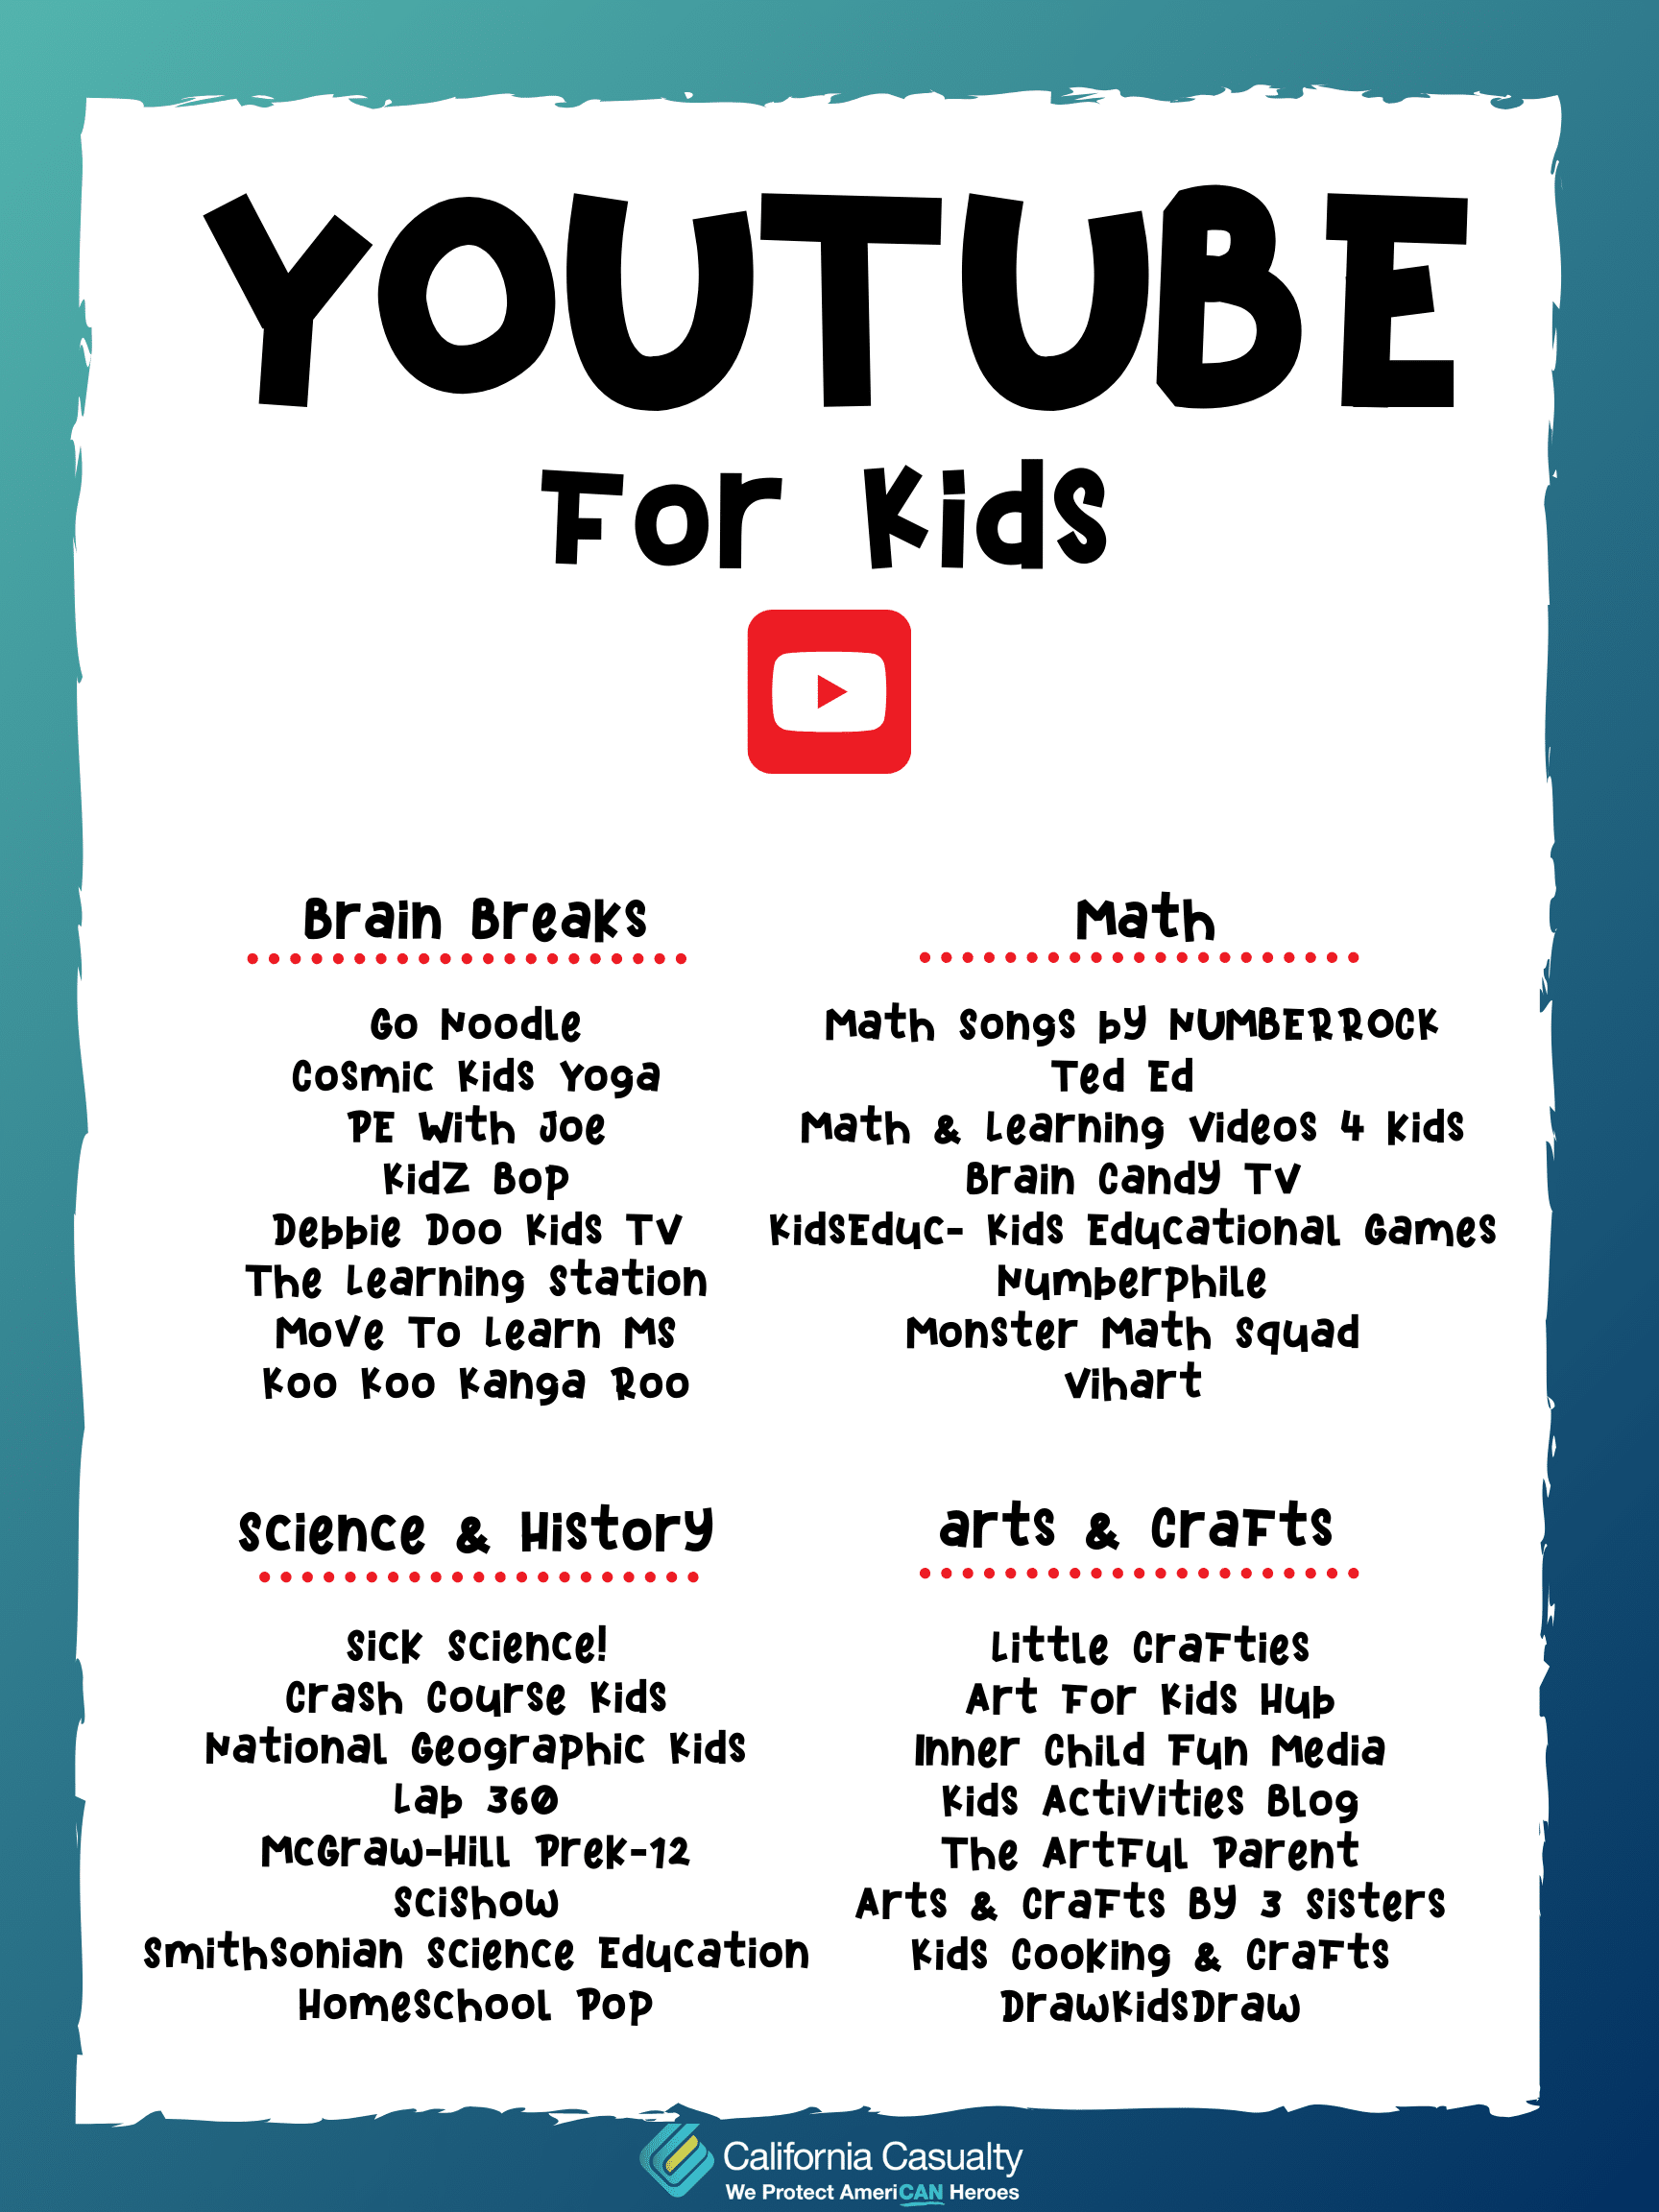 Youtube Channel Guide for kids